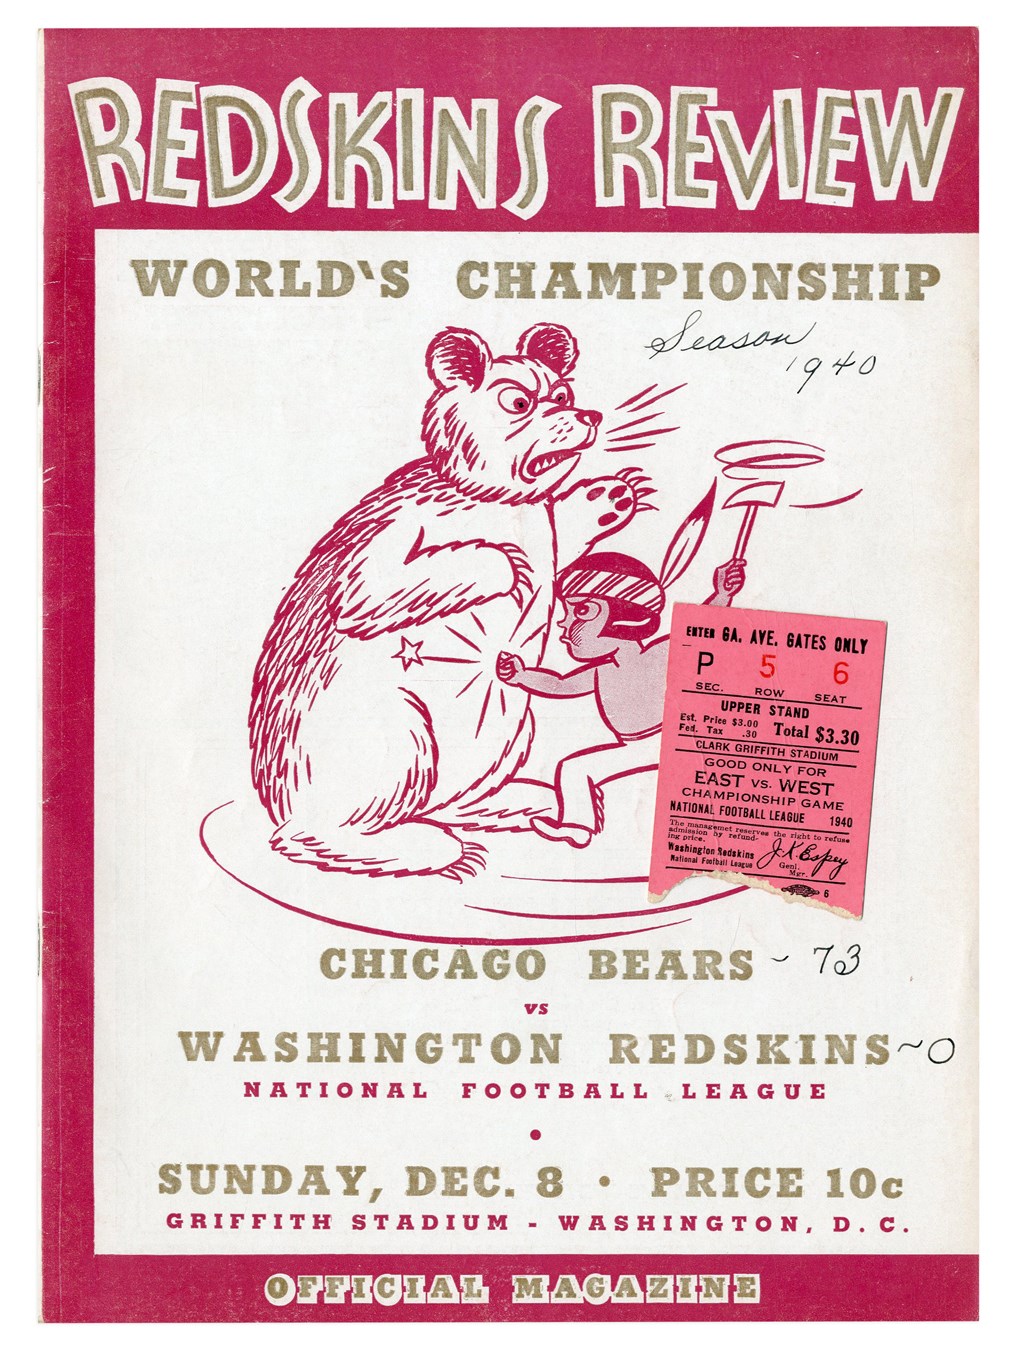 Tickets, Publications & Pins - Classic 1940 NFL Championship Game Program & Ticket & More (73-0)